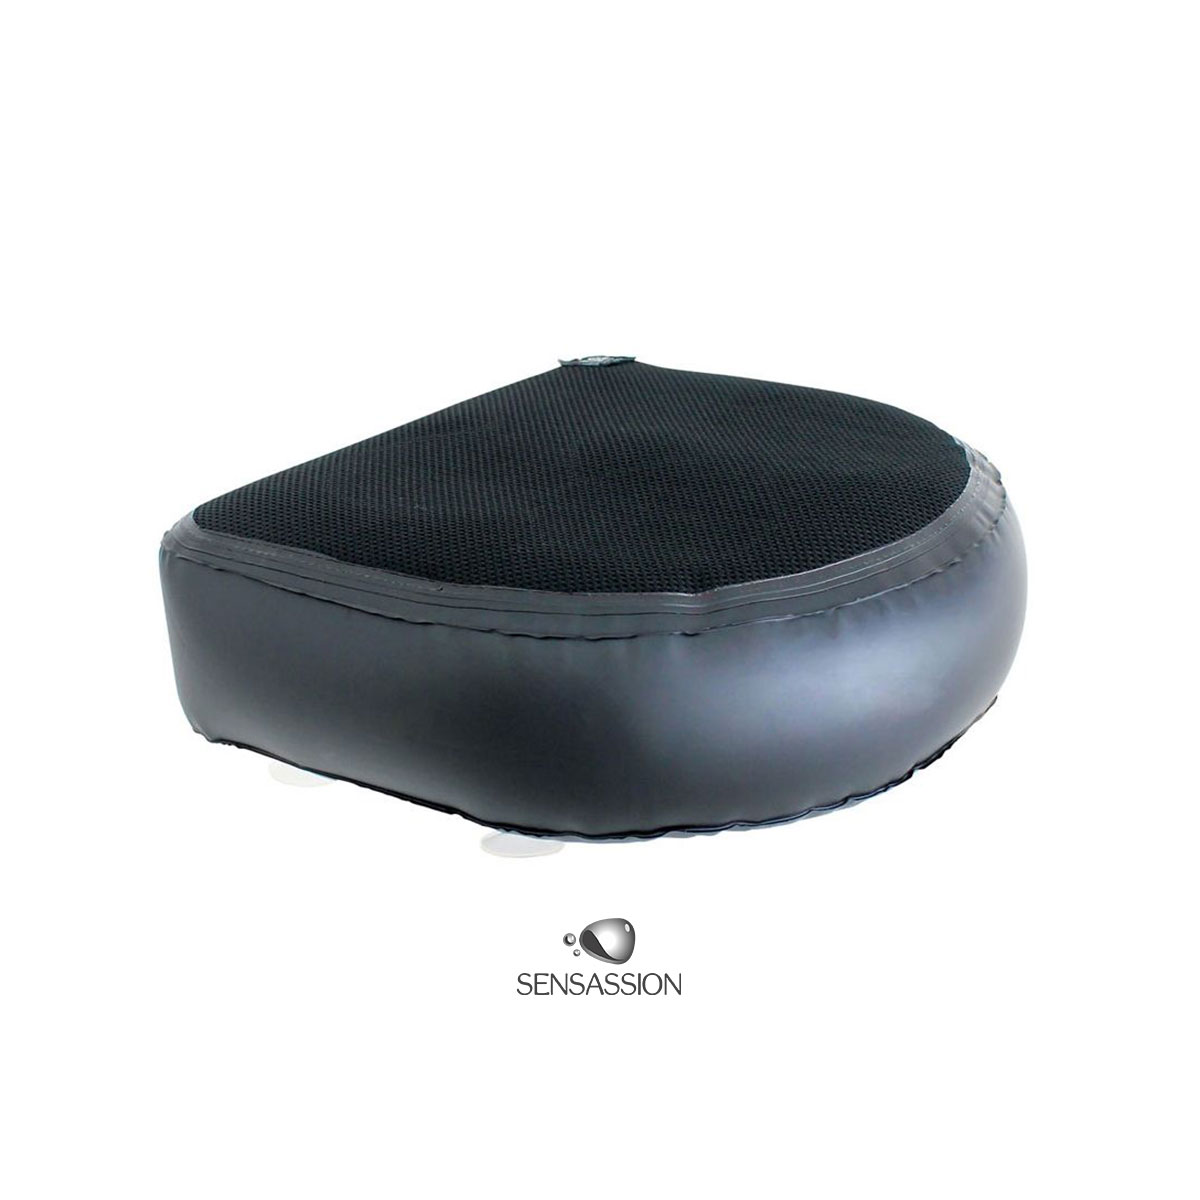 Siège rehausseur gonflable pour spa Hot tub (Spa Booster Seat) Life